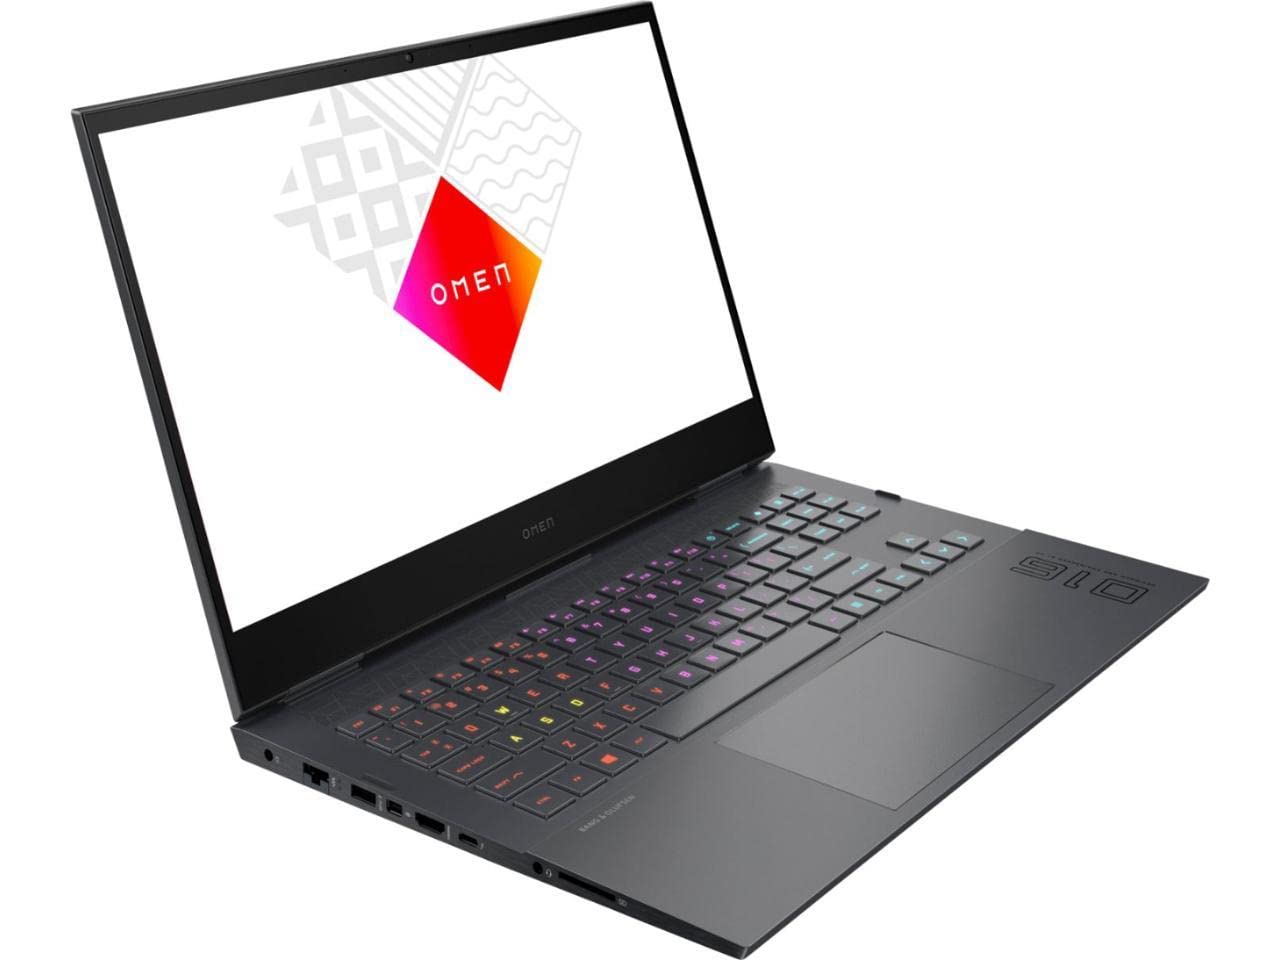 2022 Latest HP Omen 16 Gaming Laptop 16.1” FHD 144Hz Display Core i7-11800H Upto 4.6GHz 16GB 1TB SSD NVIDIA RTX 3060 6GB Graphics RGB Backlit Eng Key WIN11 With Free Gaming Mouse